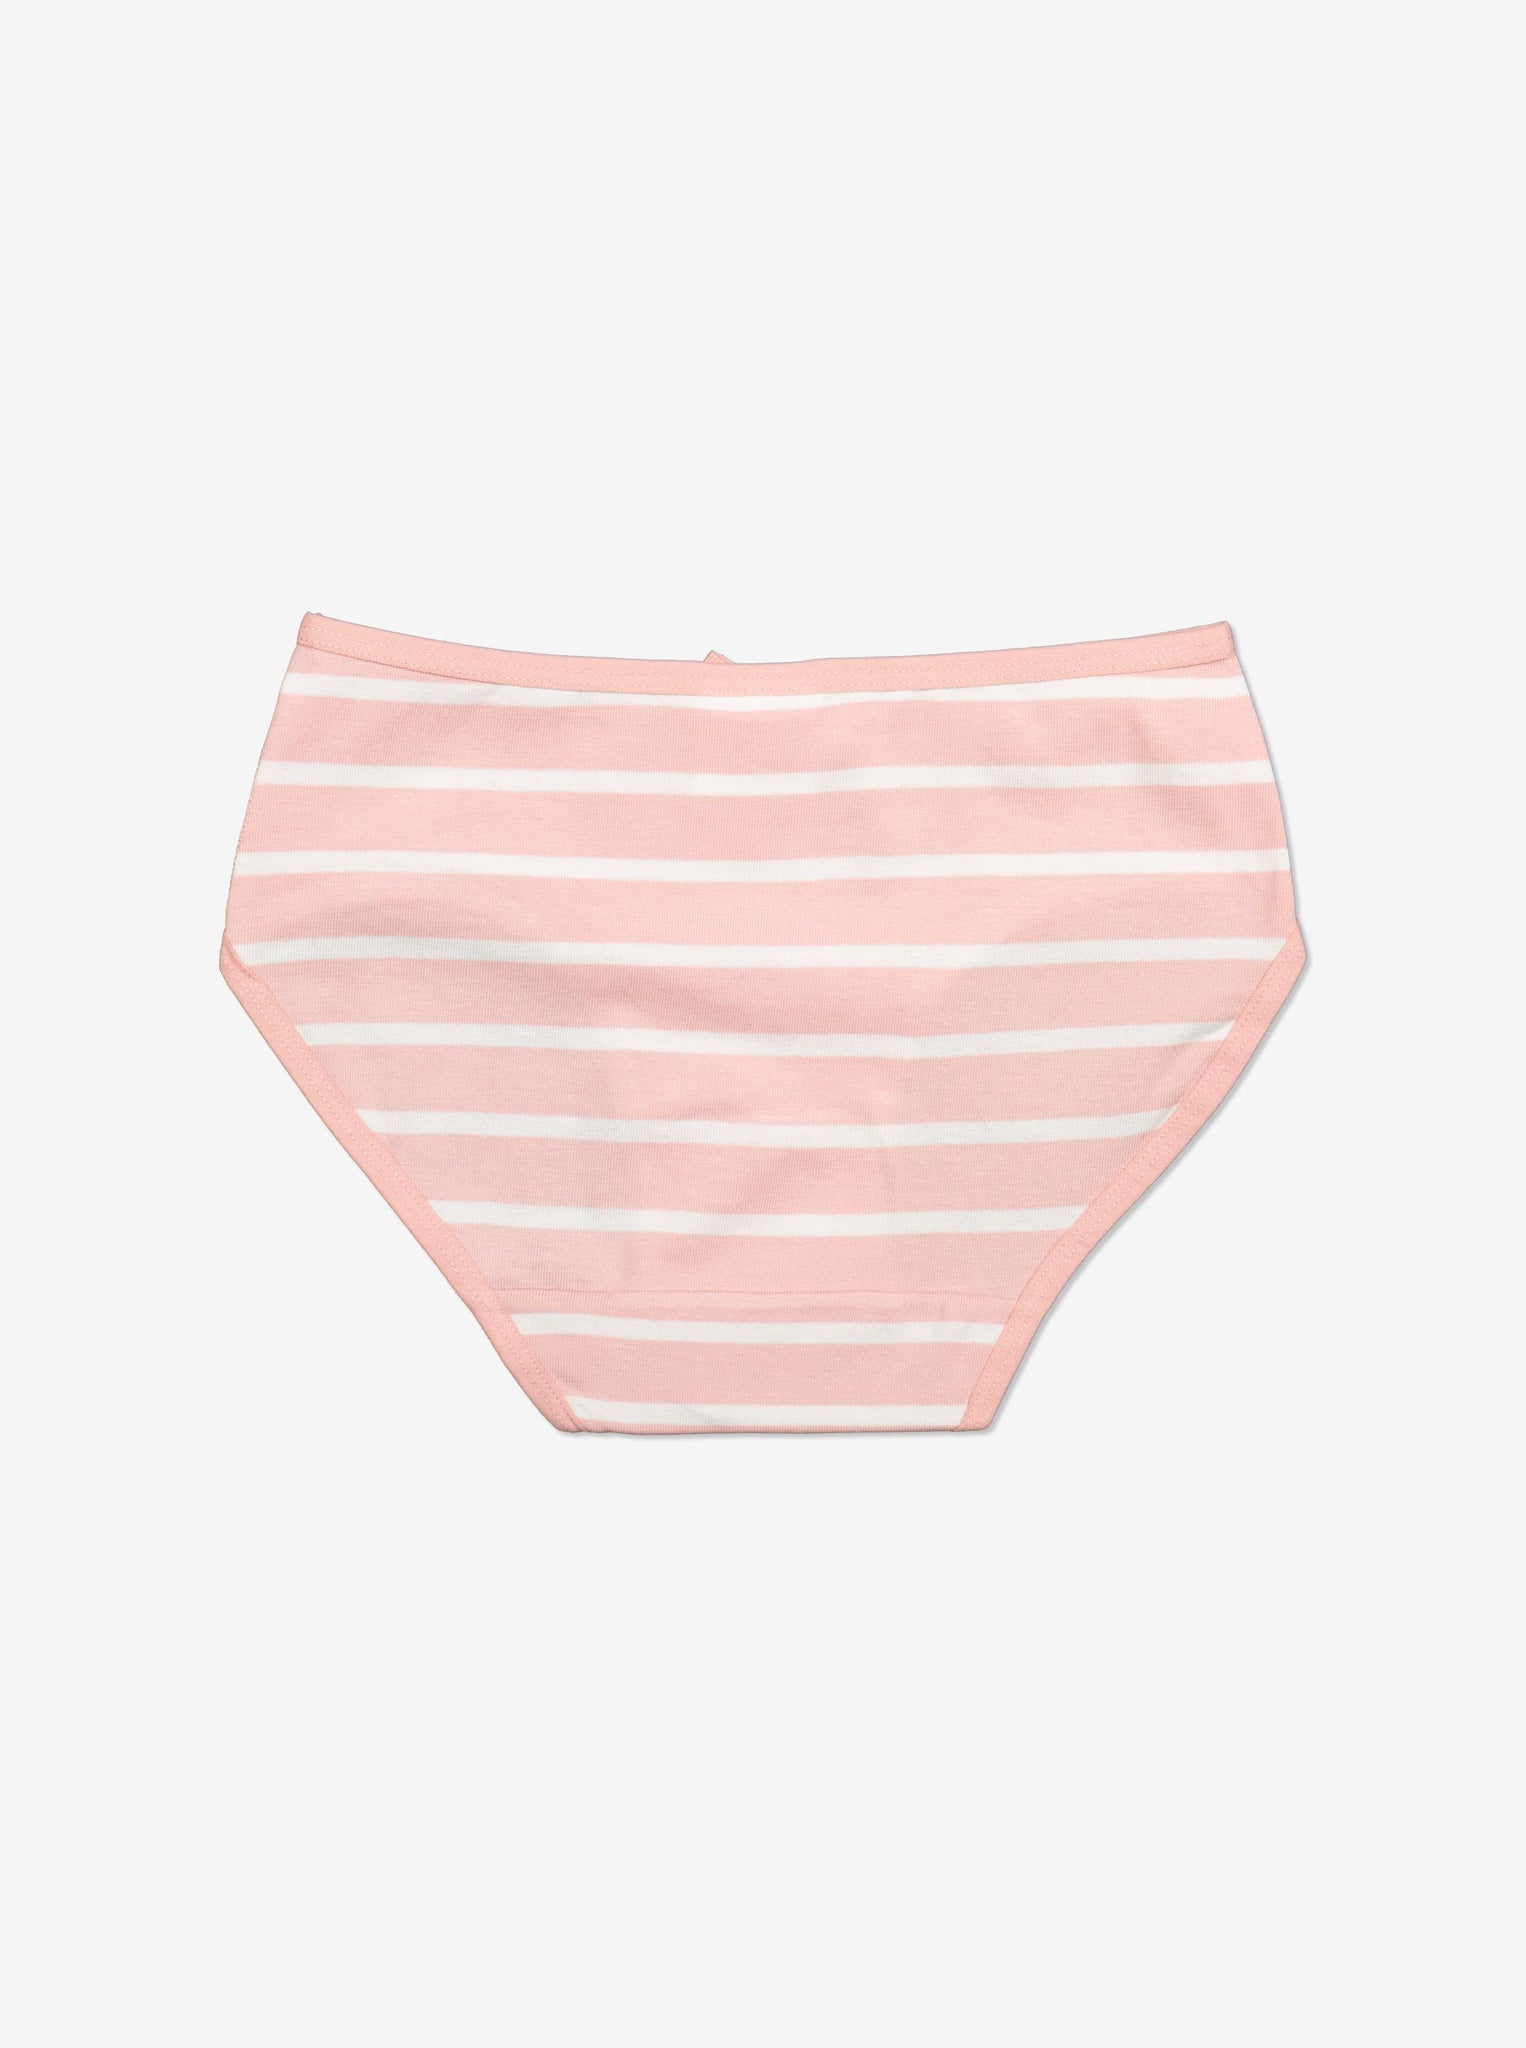  Organic Pink Girls Briefs from Polarn O. Pyret Kidswear. Made from sustainable materials.